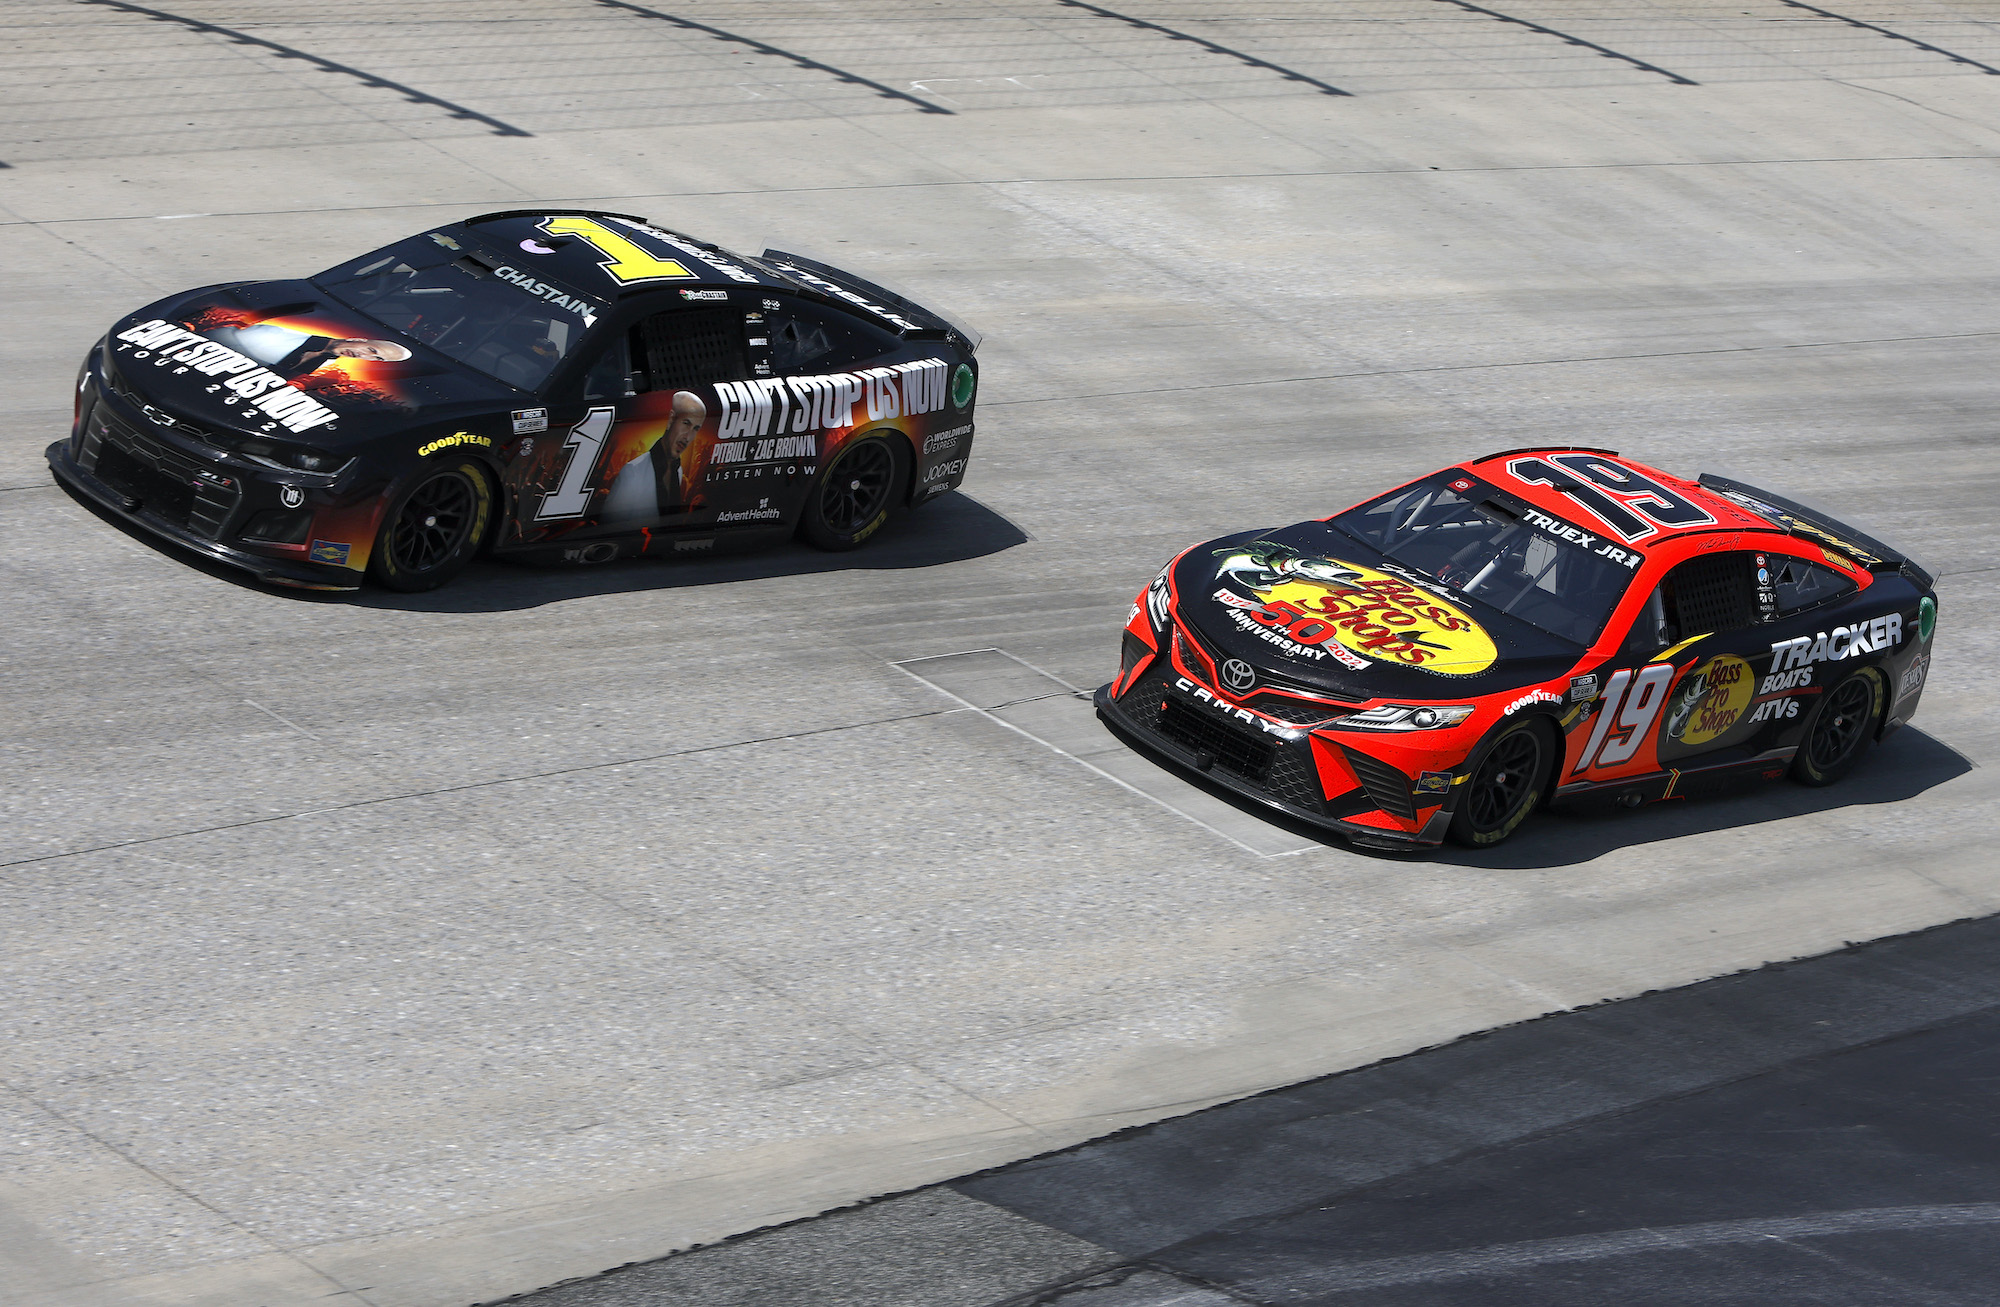 Ross Chastain and Martin Truex Jr. at Dover